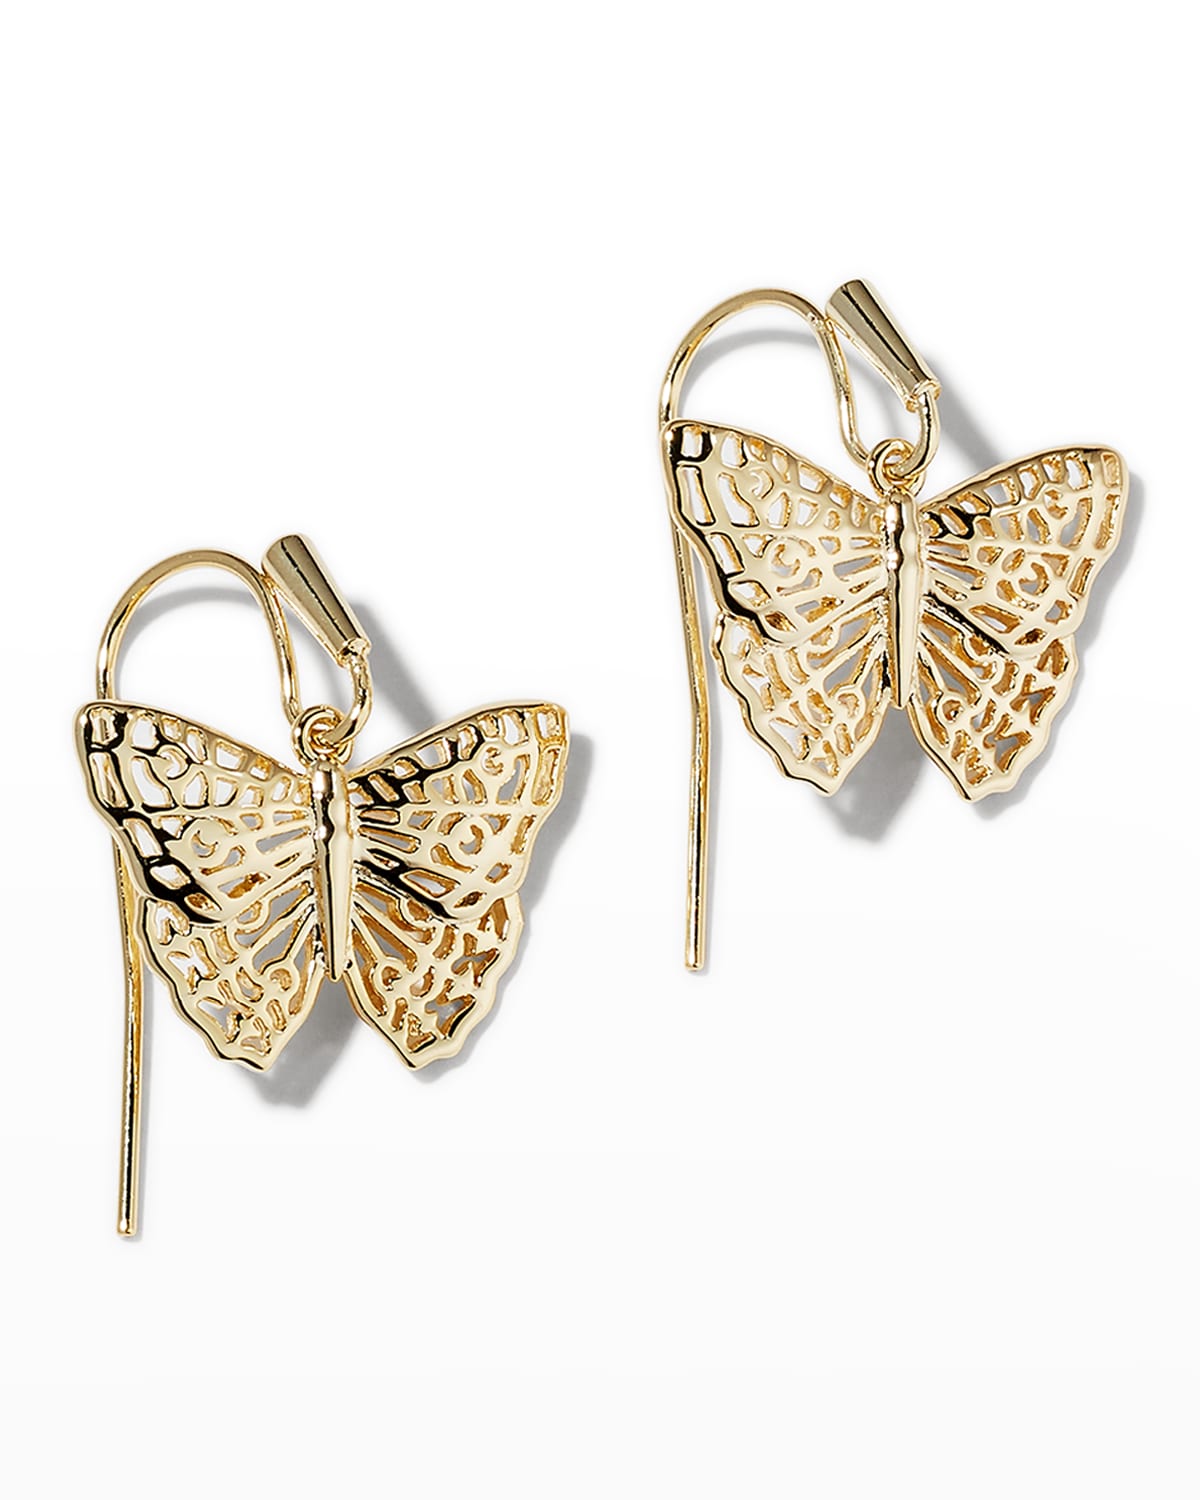 Oval Shaped Drop Earrings With   Real Flowers And Gold Butterflies